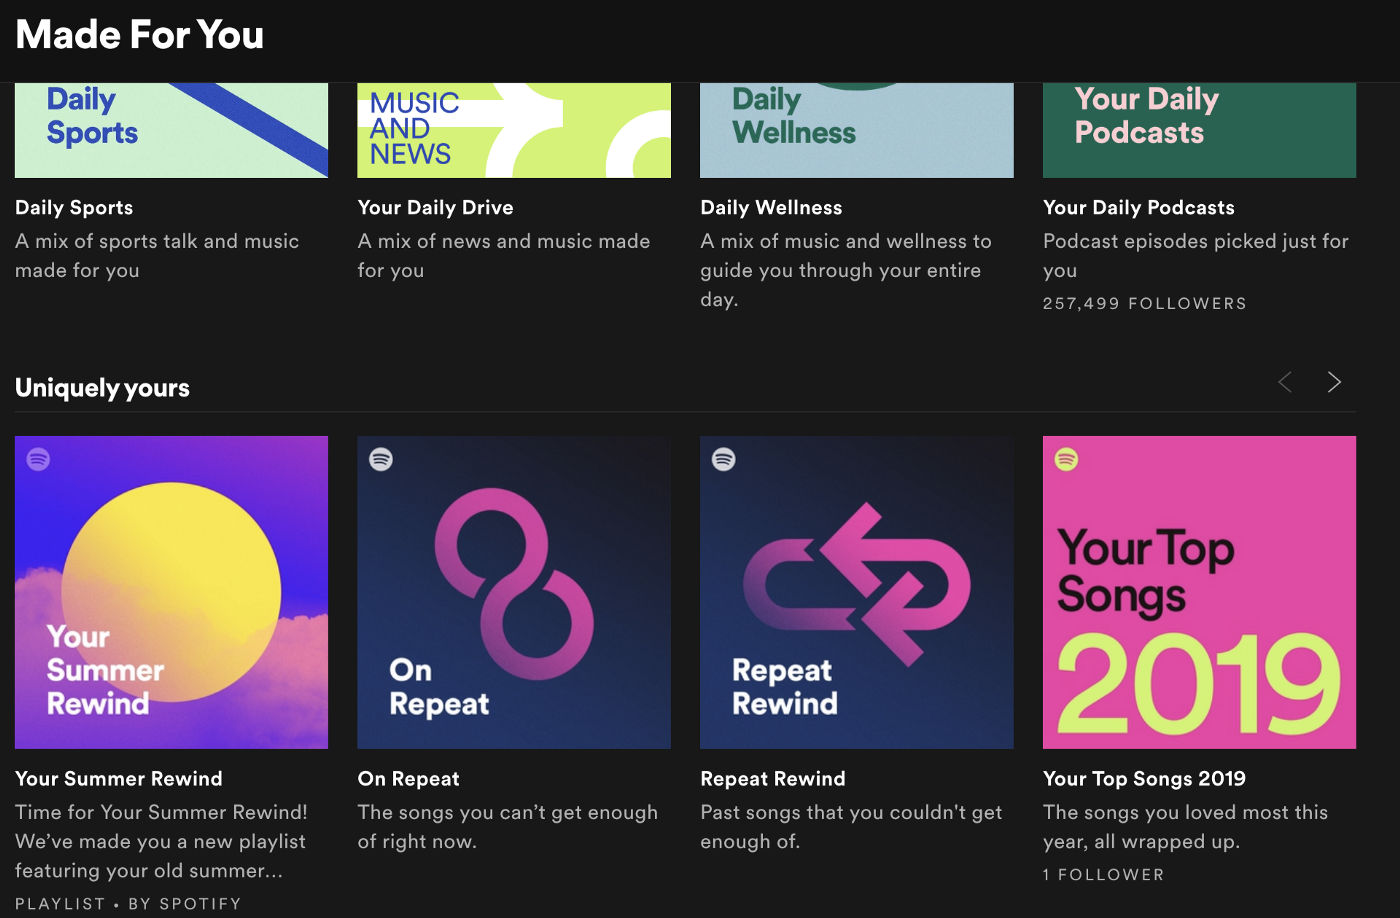 Spotify’s Made for You section of the app, including curated lists and lists based on a customer’s usage.